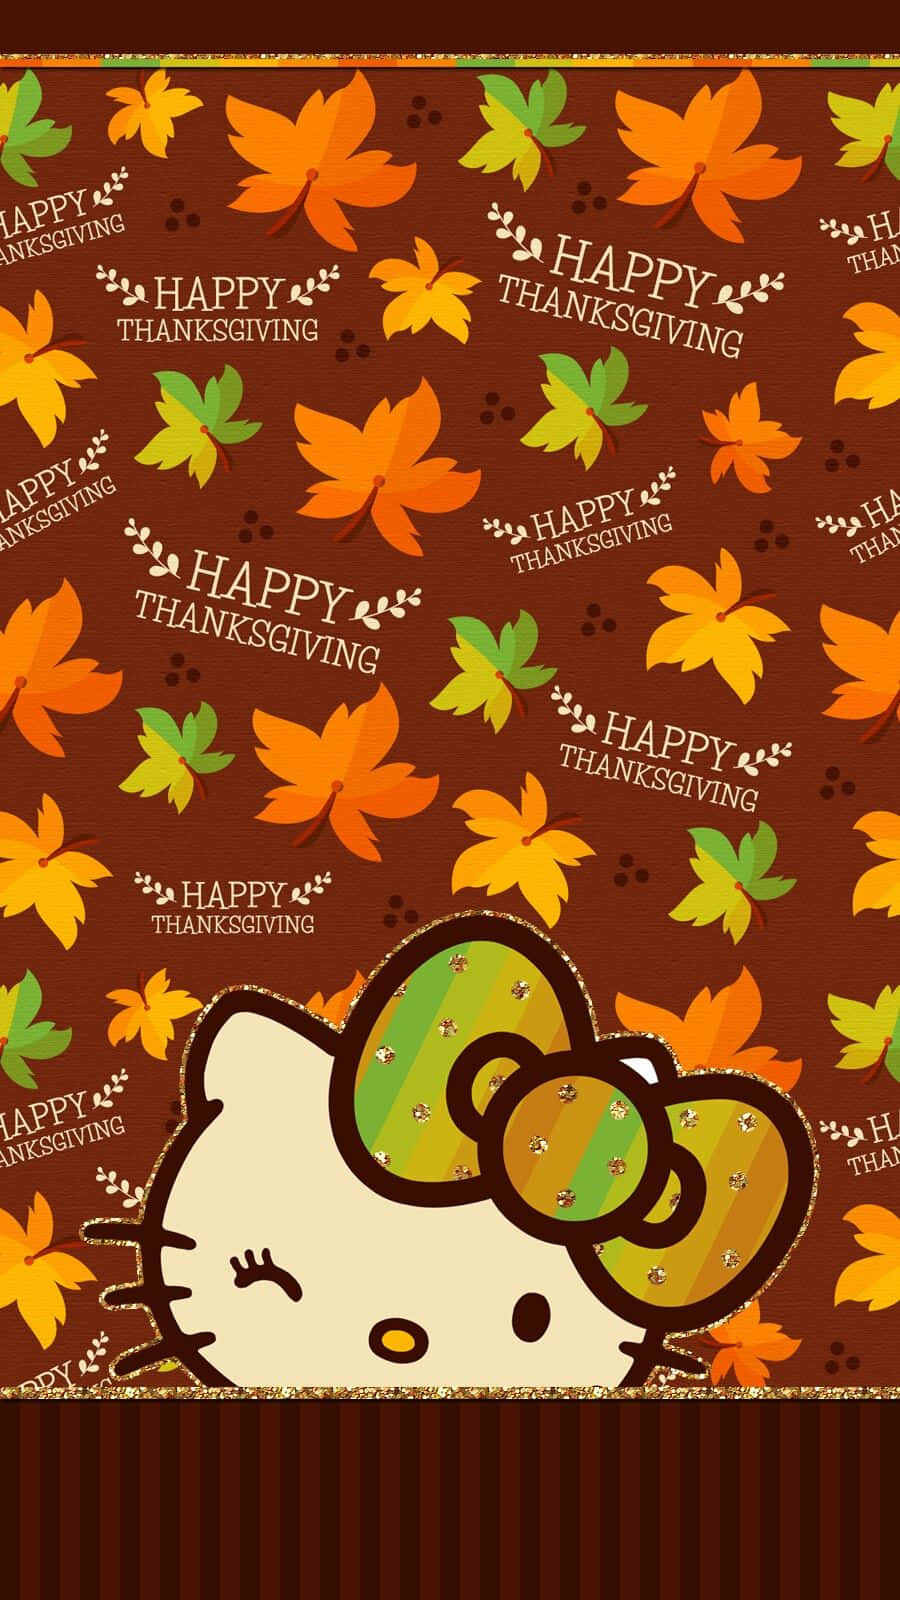 Get Ready For A Fun And Festive Hello Kitty Thanksgiving! Background